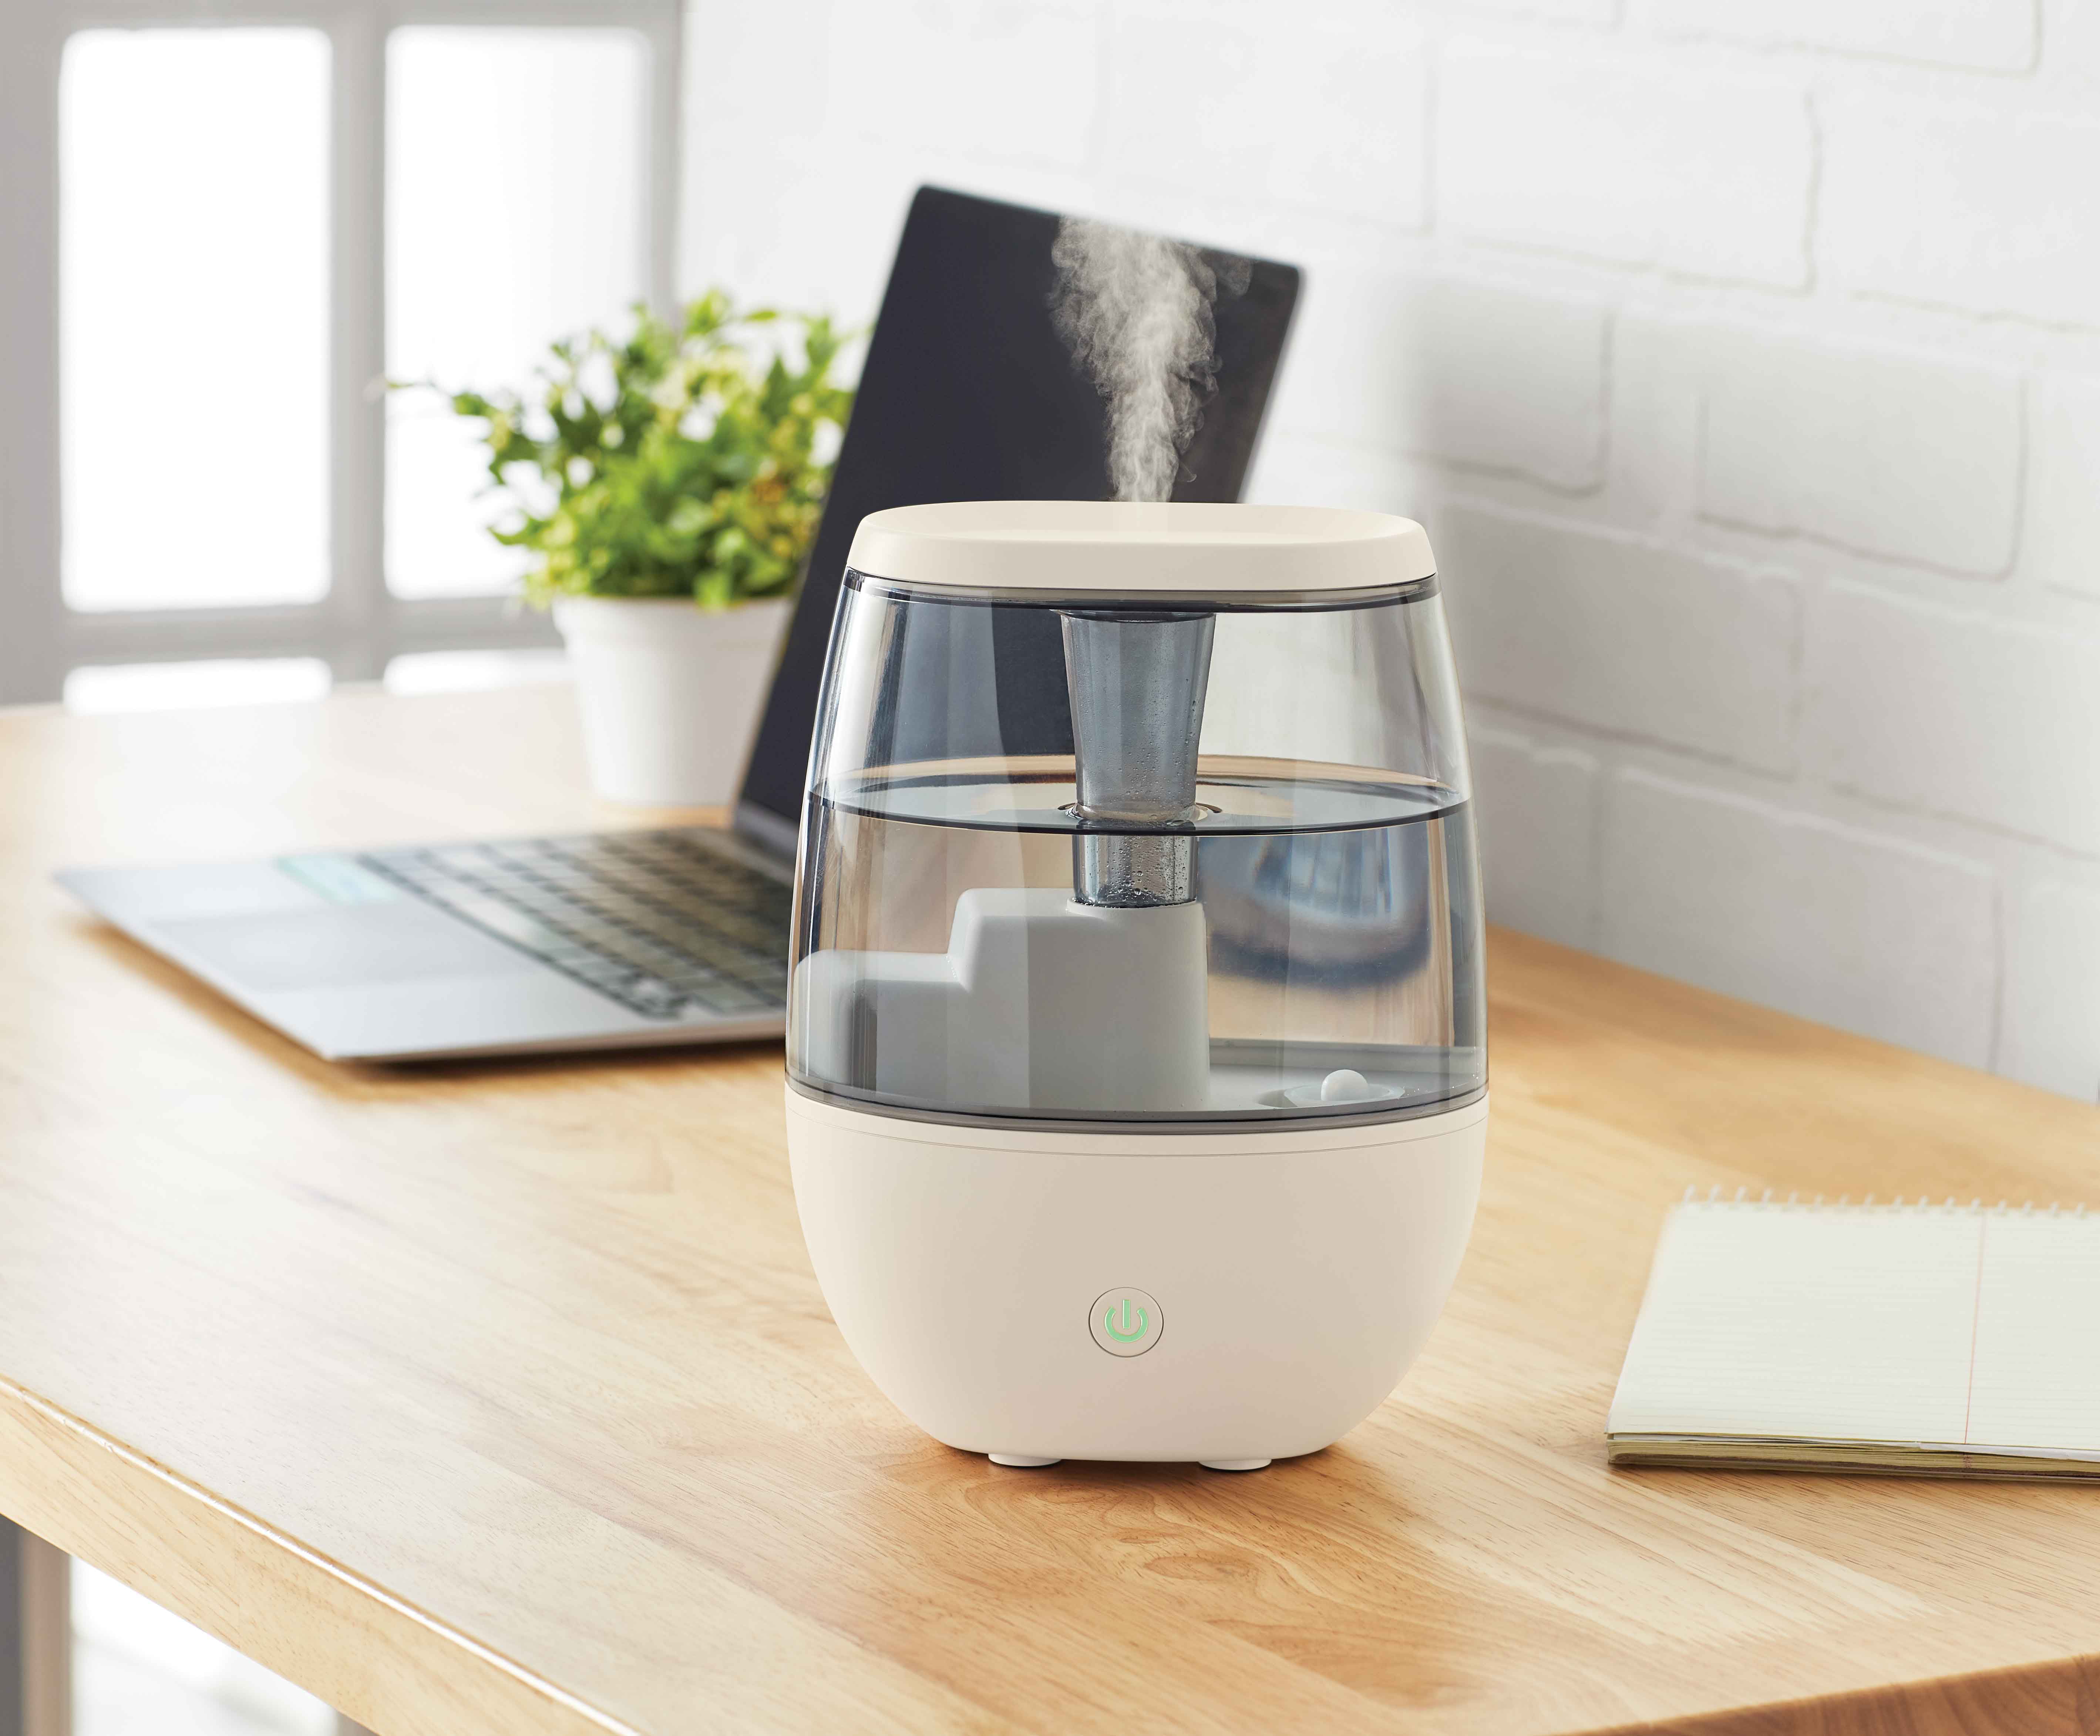  Dreamzy Humidifier,Dreamzy Ultrasonic Cool Mist Humidifier  500ml - Quiet Air Humidifier for Bedroom with Streaming Light, Easy Clean,  Filterless Design (White) : Home & Kitchen